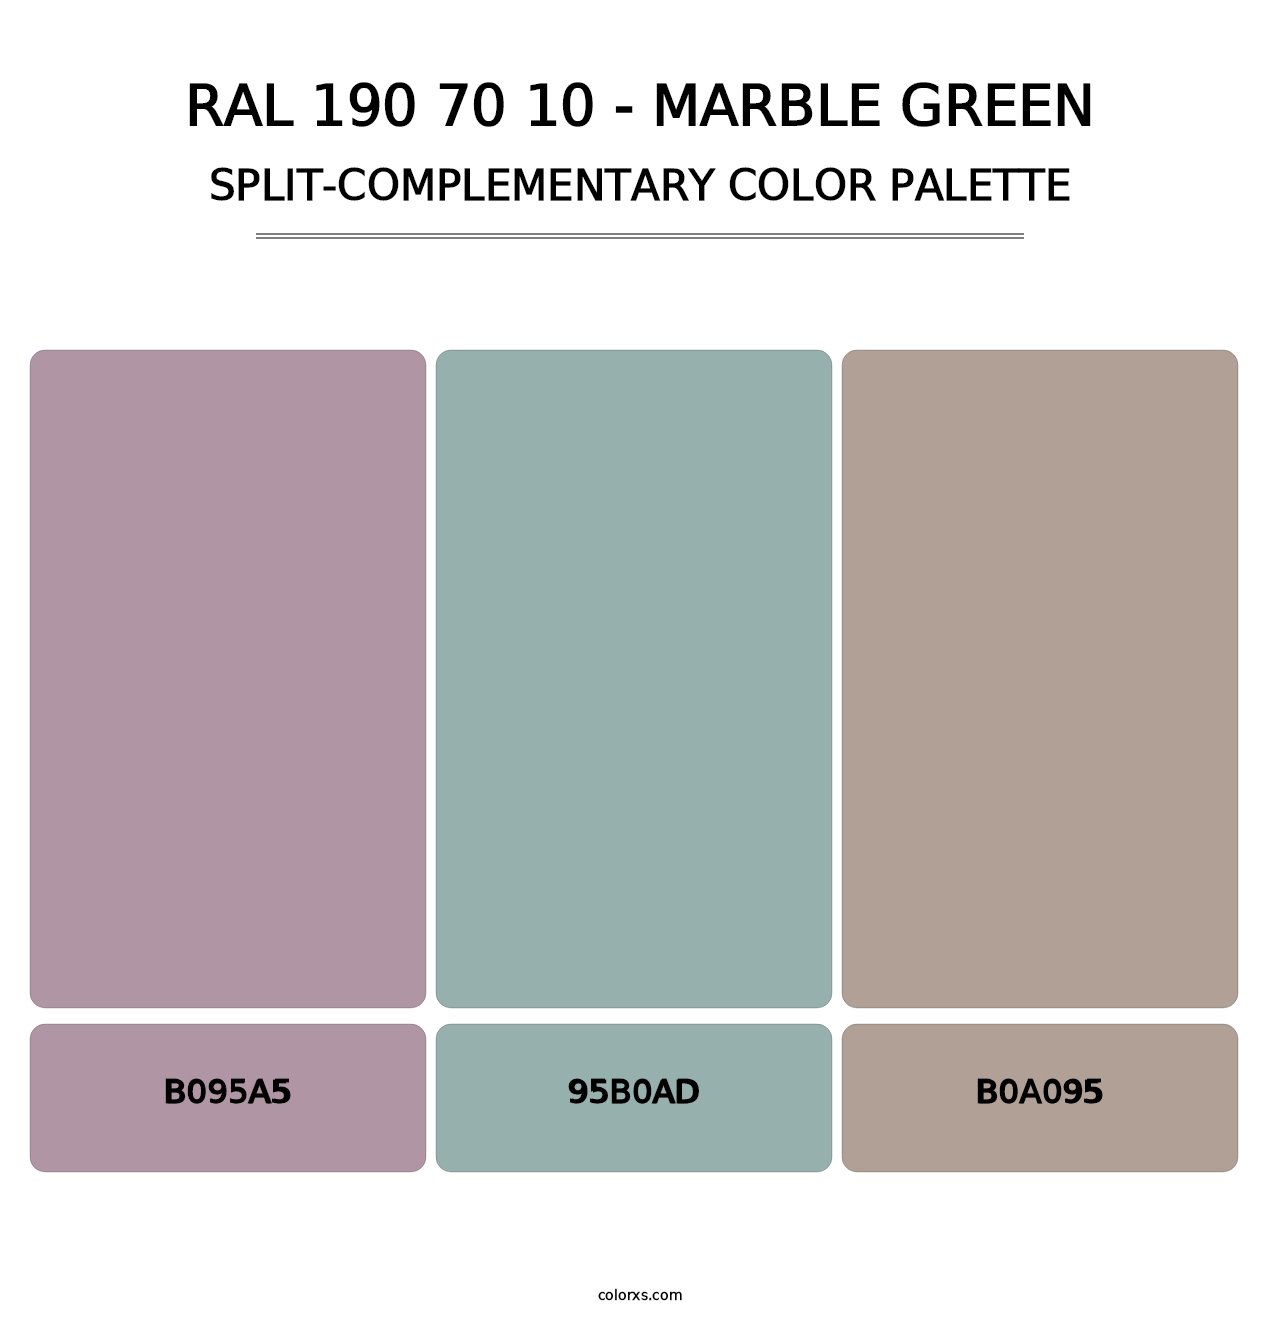 RAL 190 70 10 - Marble Green - Split-Complementary Color Palette